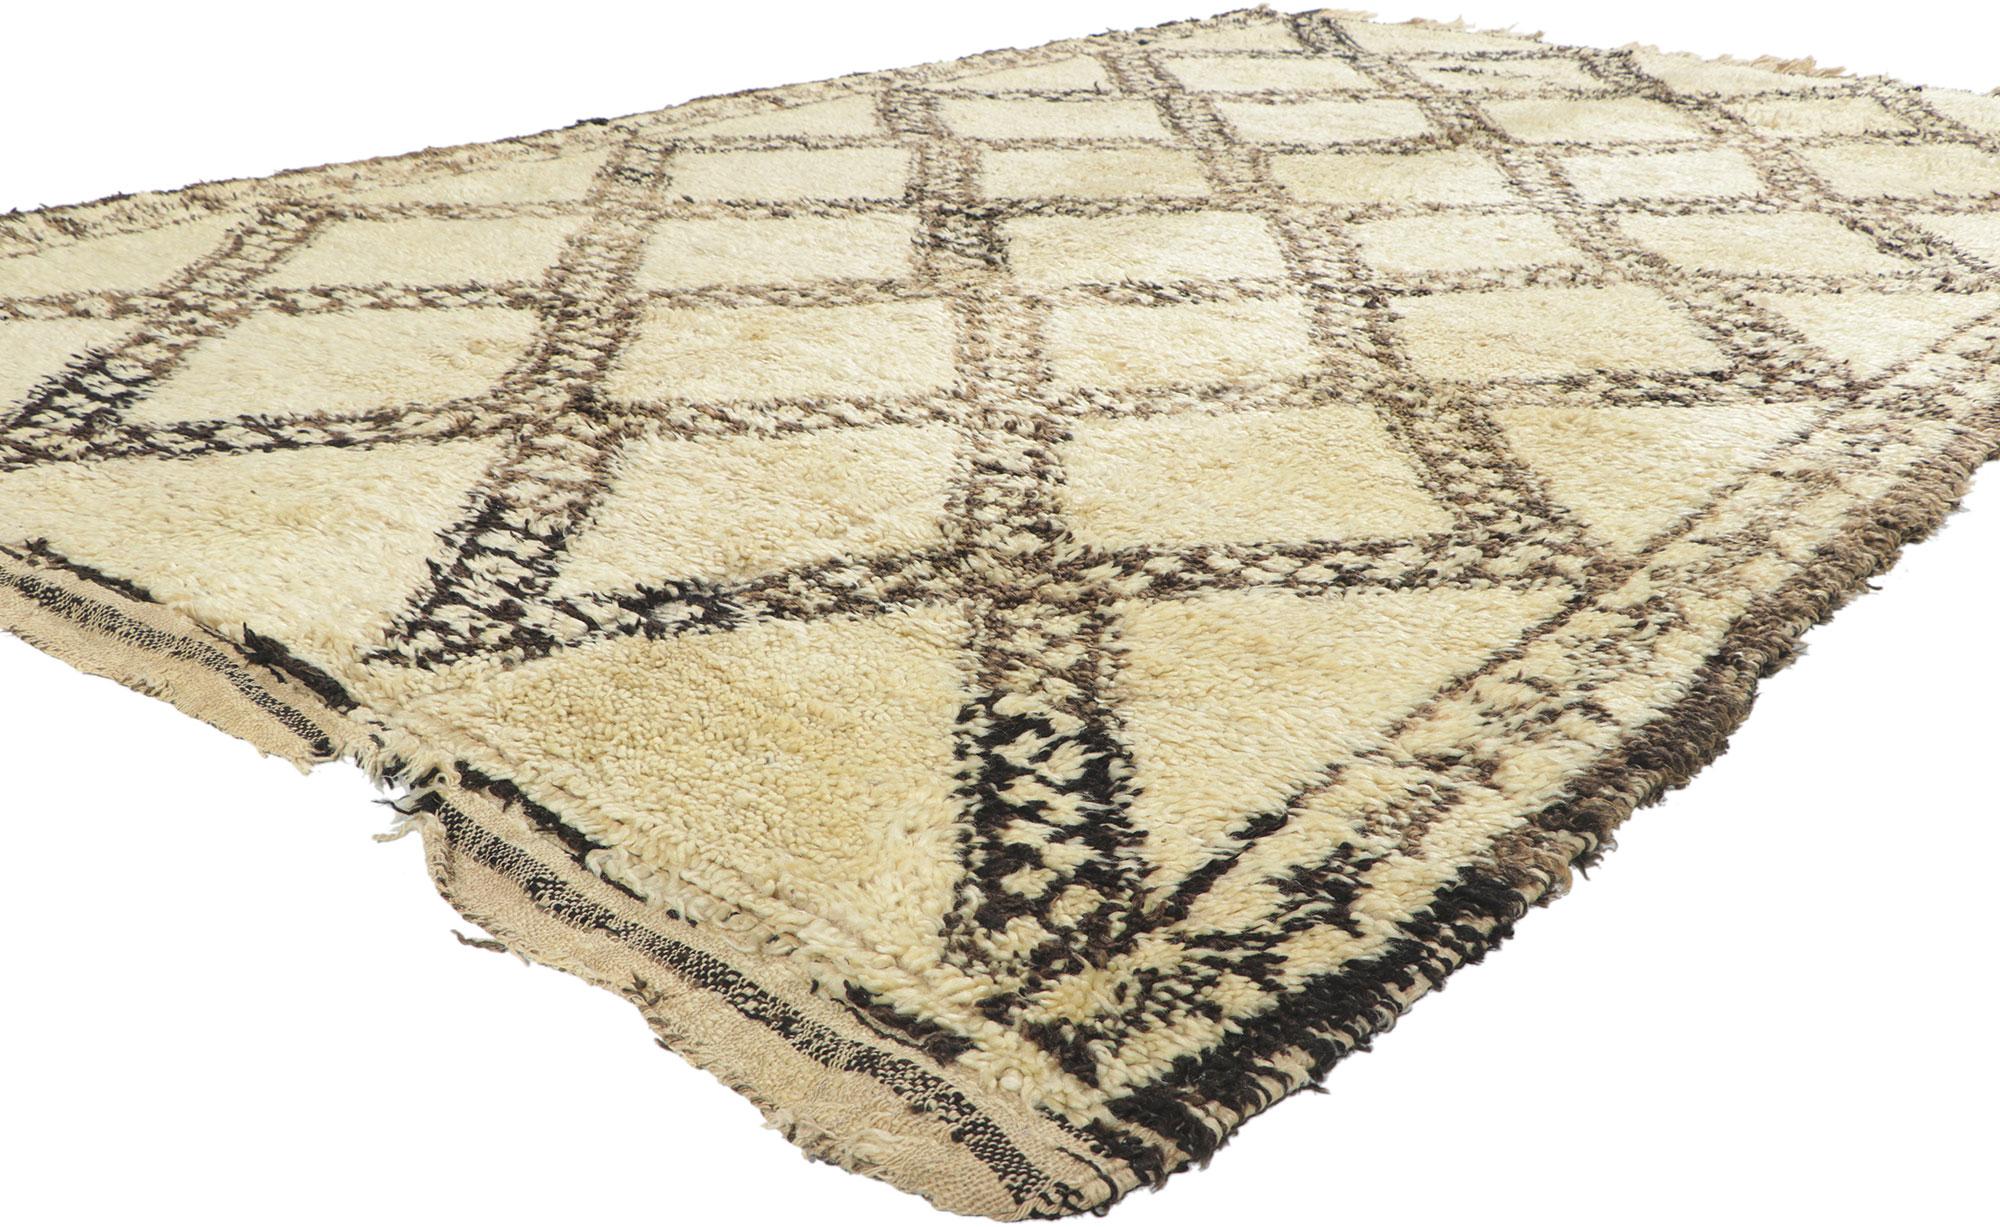 78374 Vintage Moroccan Beni Ourain Rug, 06'09 x 10'07. With its Mid-Century Modern style, incredible detail and texture, this hand knotted wool vintage Beni Ourain Moroccan rug is a captivating vision of woven beauty. The eye-catching diamond